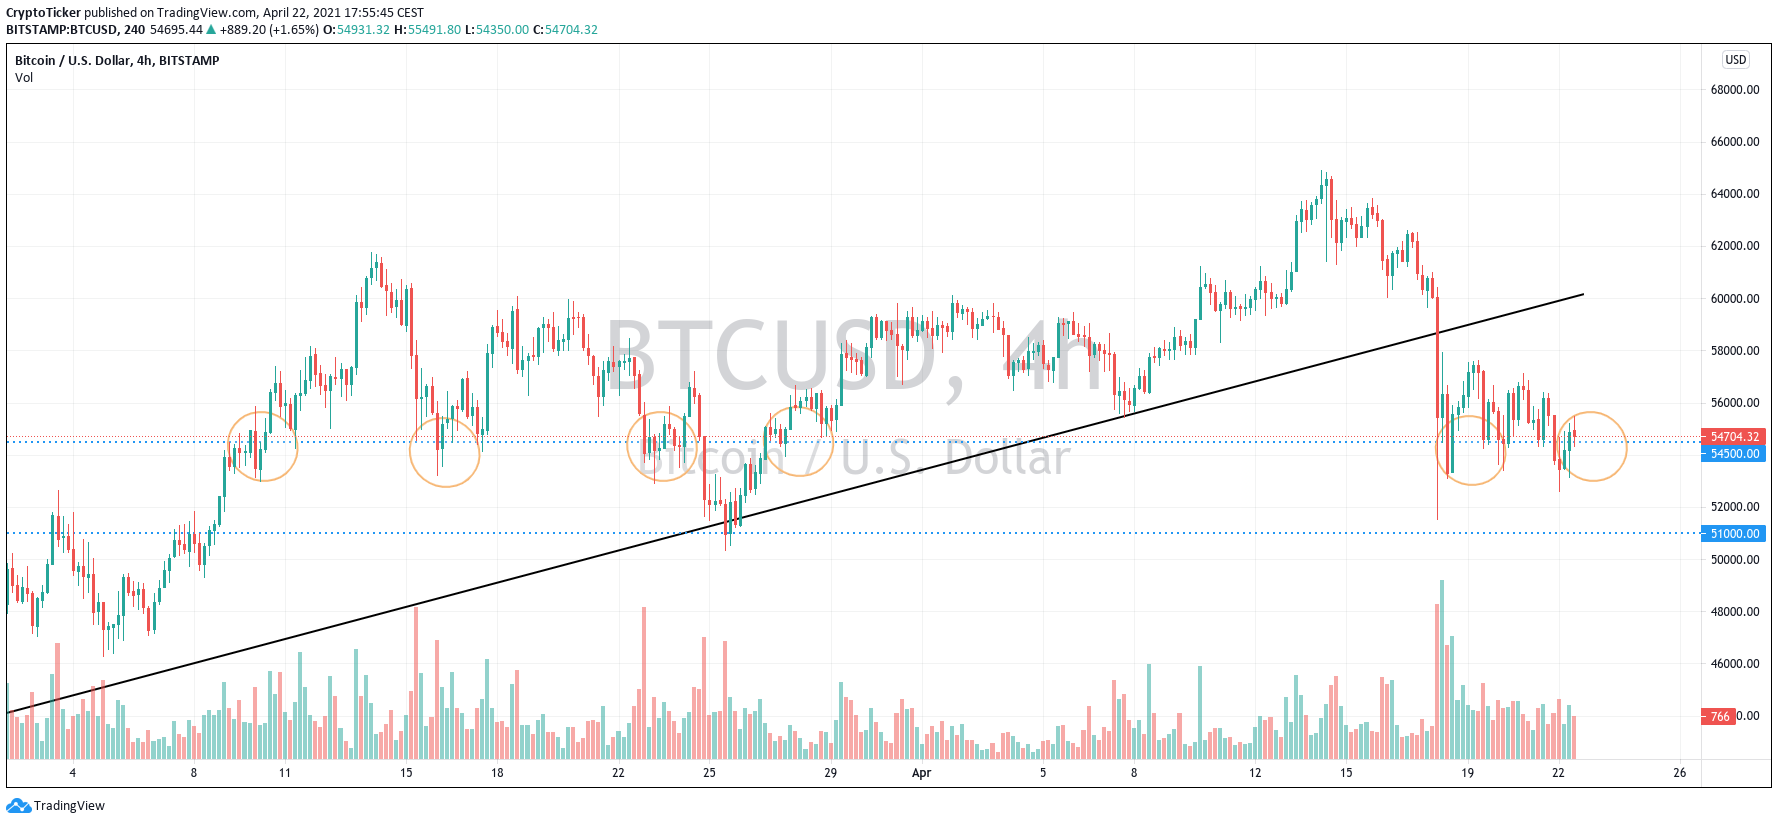 BTC/USD 4-hour chart showing the important price mark of USD 54,500